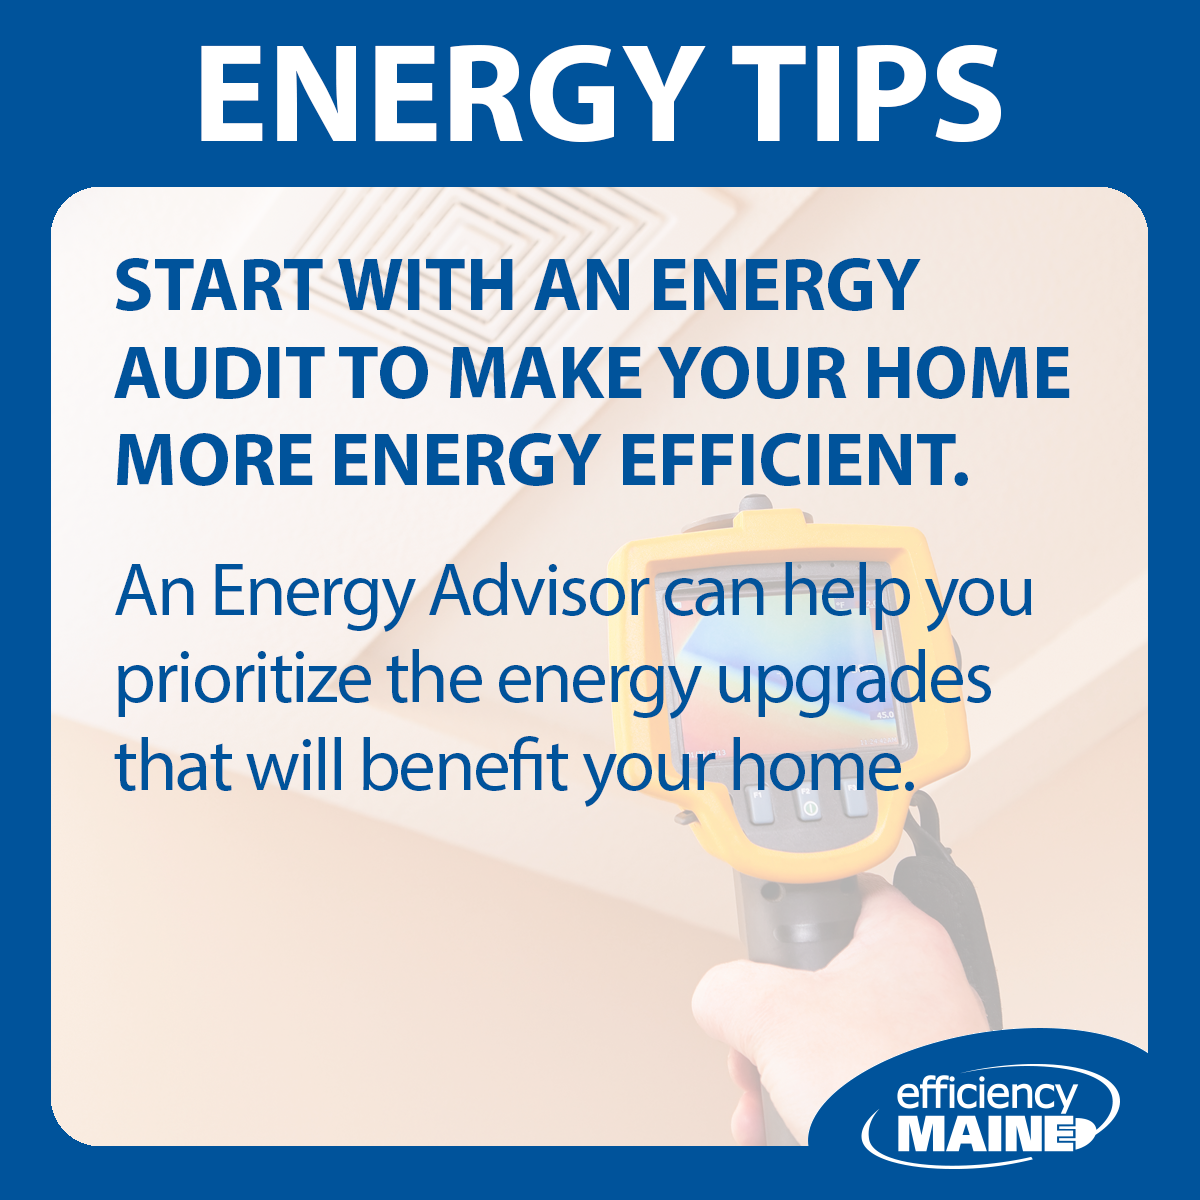 Start With an Energy Audit